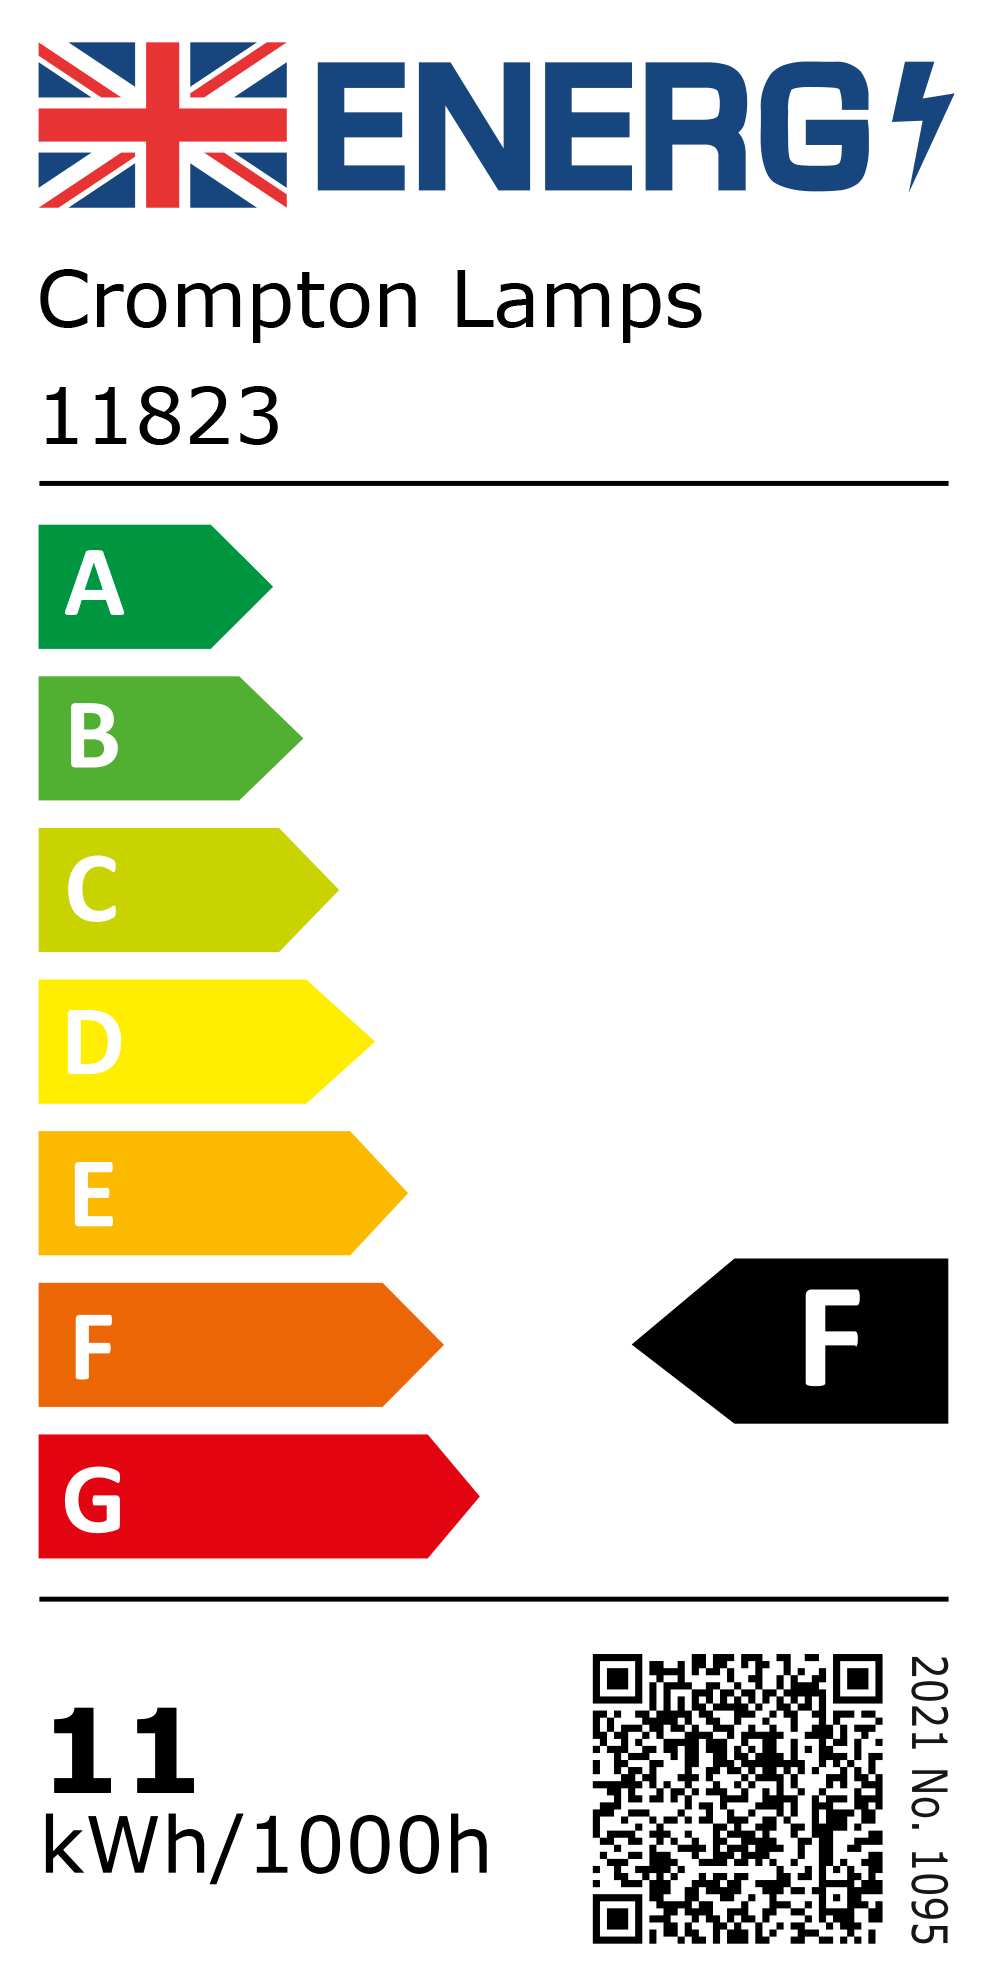 New 2021 Energy Rating Label: Stock Code 11823